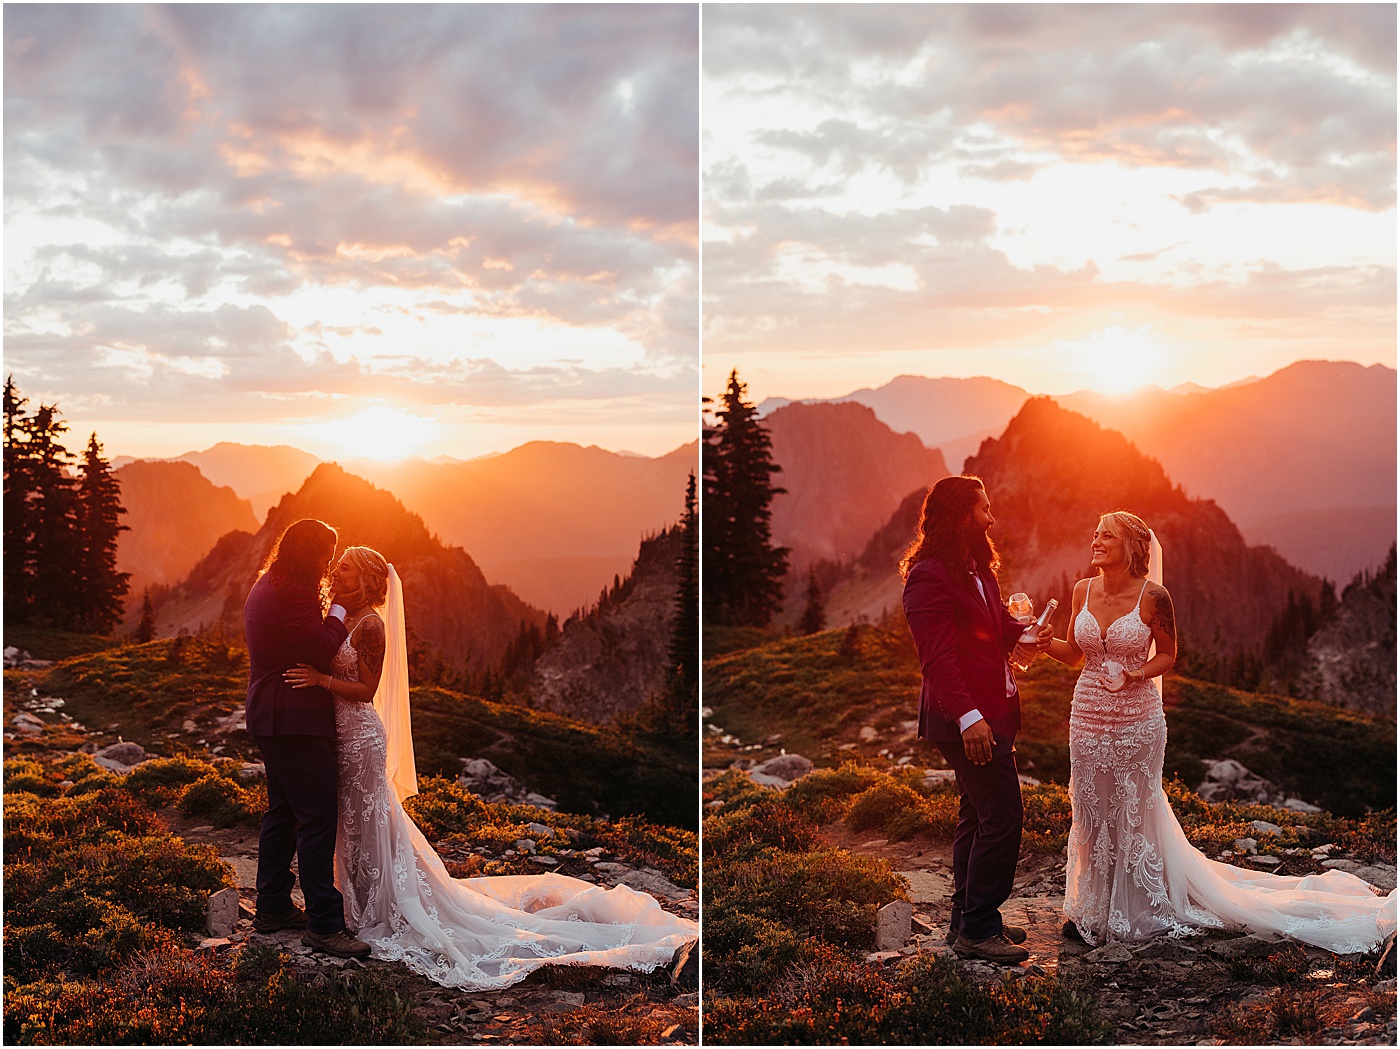 Sunset portraits after intimate elopement at Mount Rainier | Photo by Megan Montalvo Photography